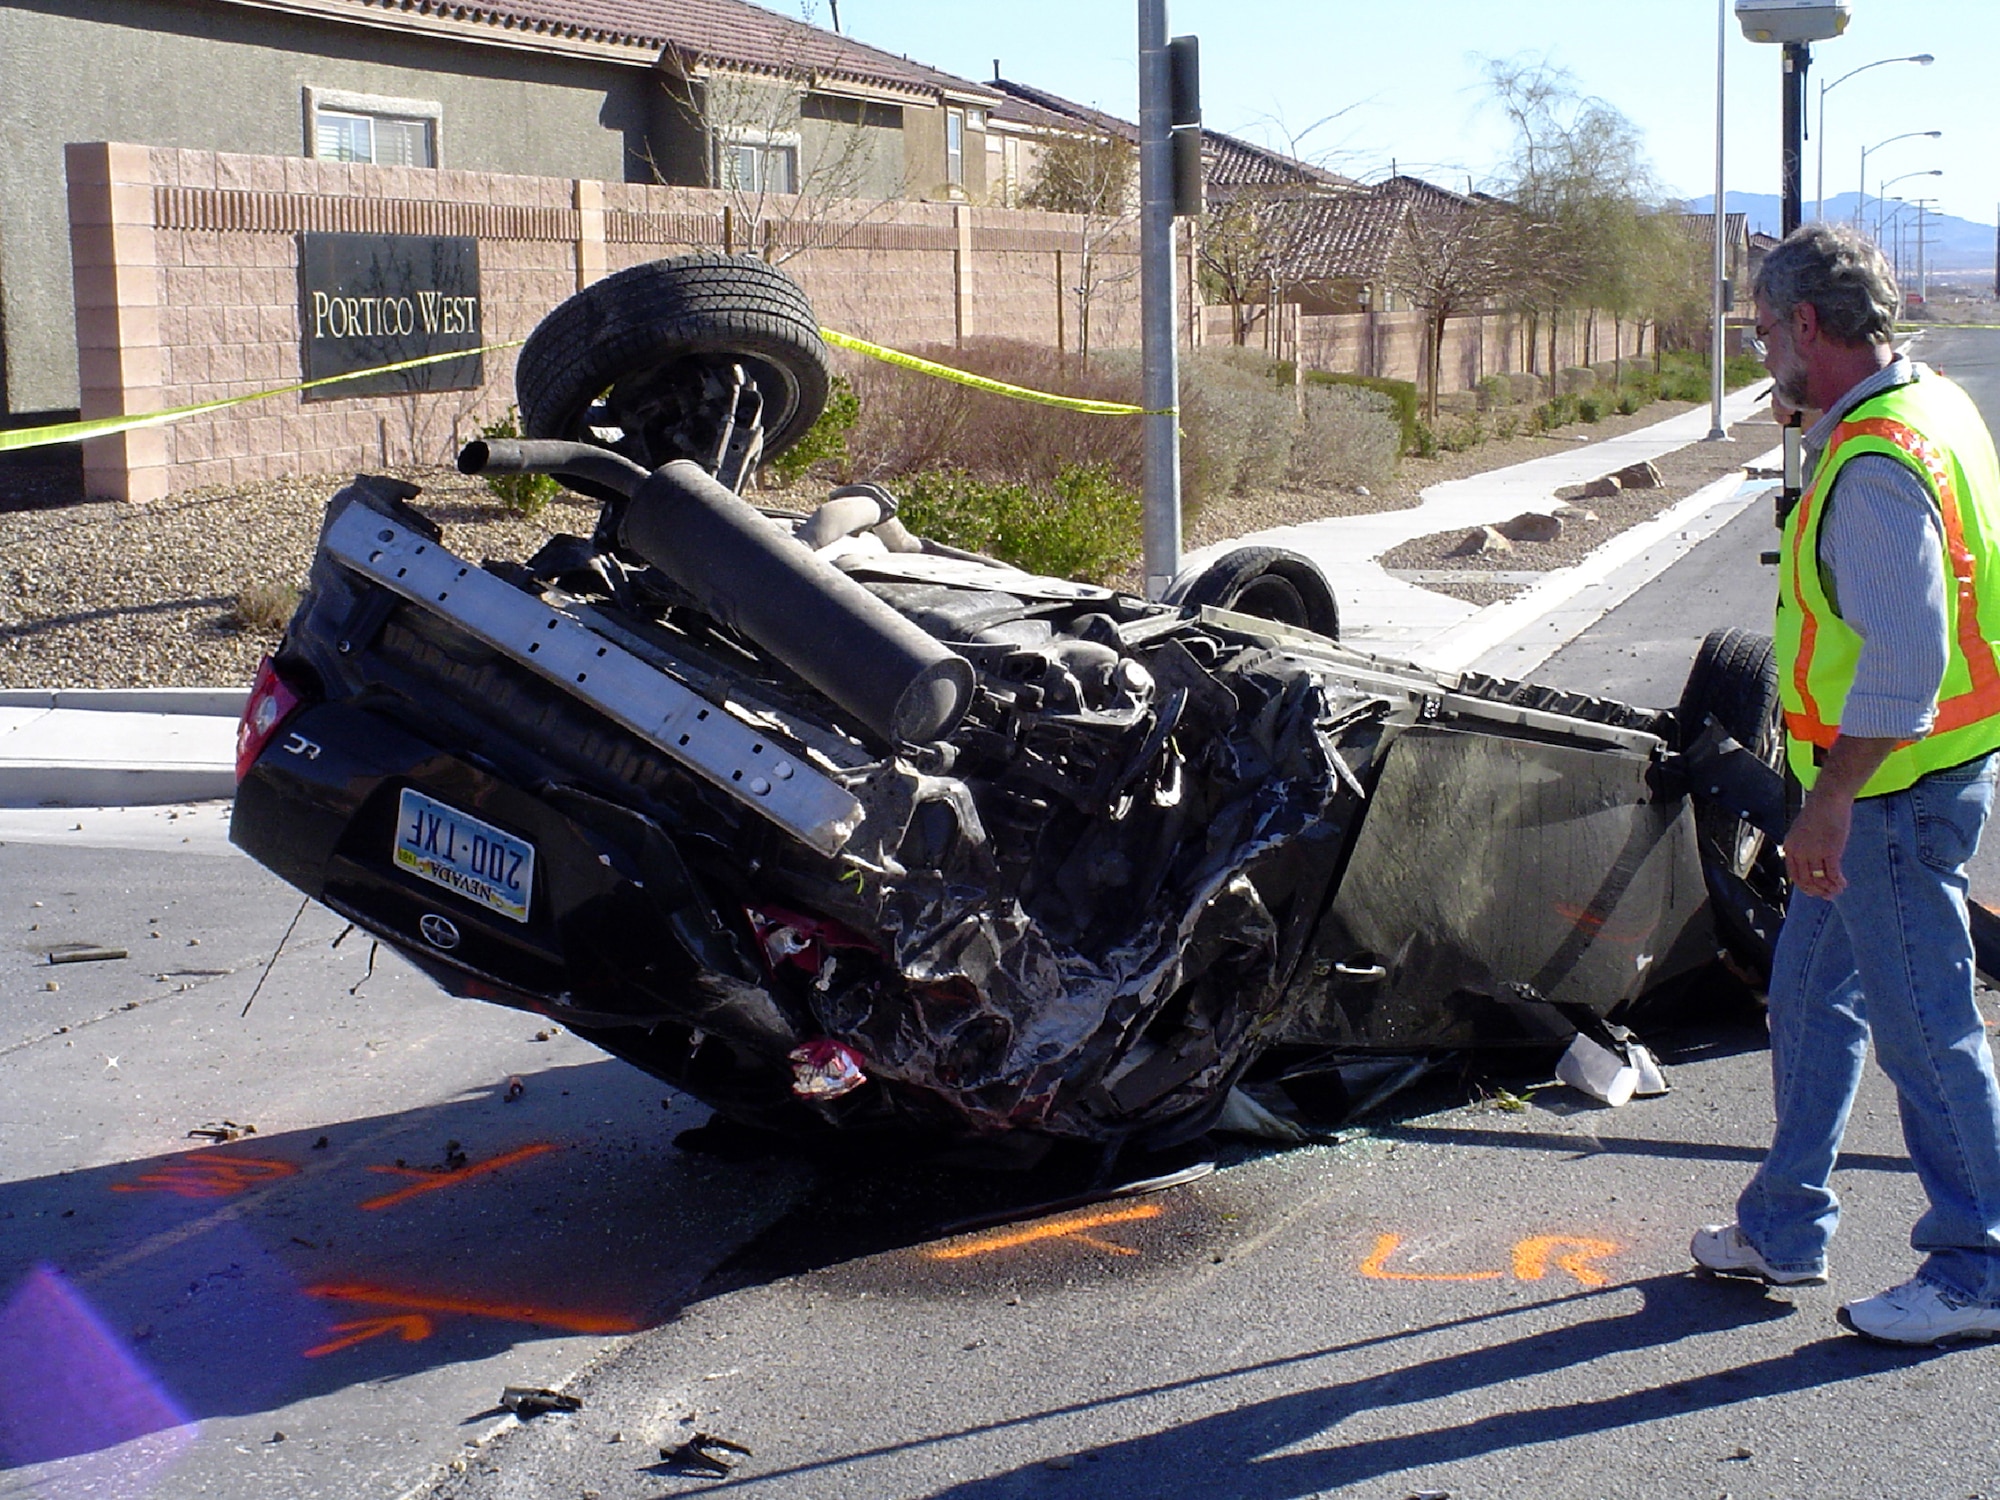 pictured is an Airman's totalled car after hitting a brick wall.  the Airman was fleeing from the scene of a minor accident when he lost control of his vehicle and crashed it into the wall.  The Airman was ejected from the vehicle because he was not wearin his seatbelt. (courtesy photo)